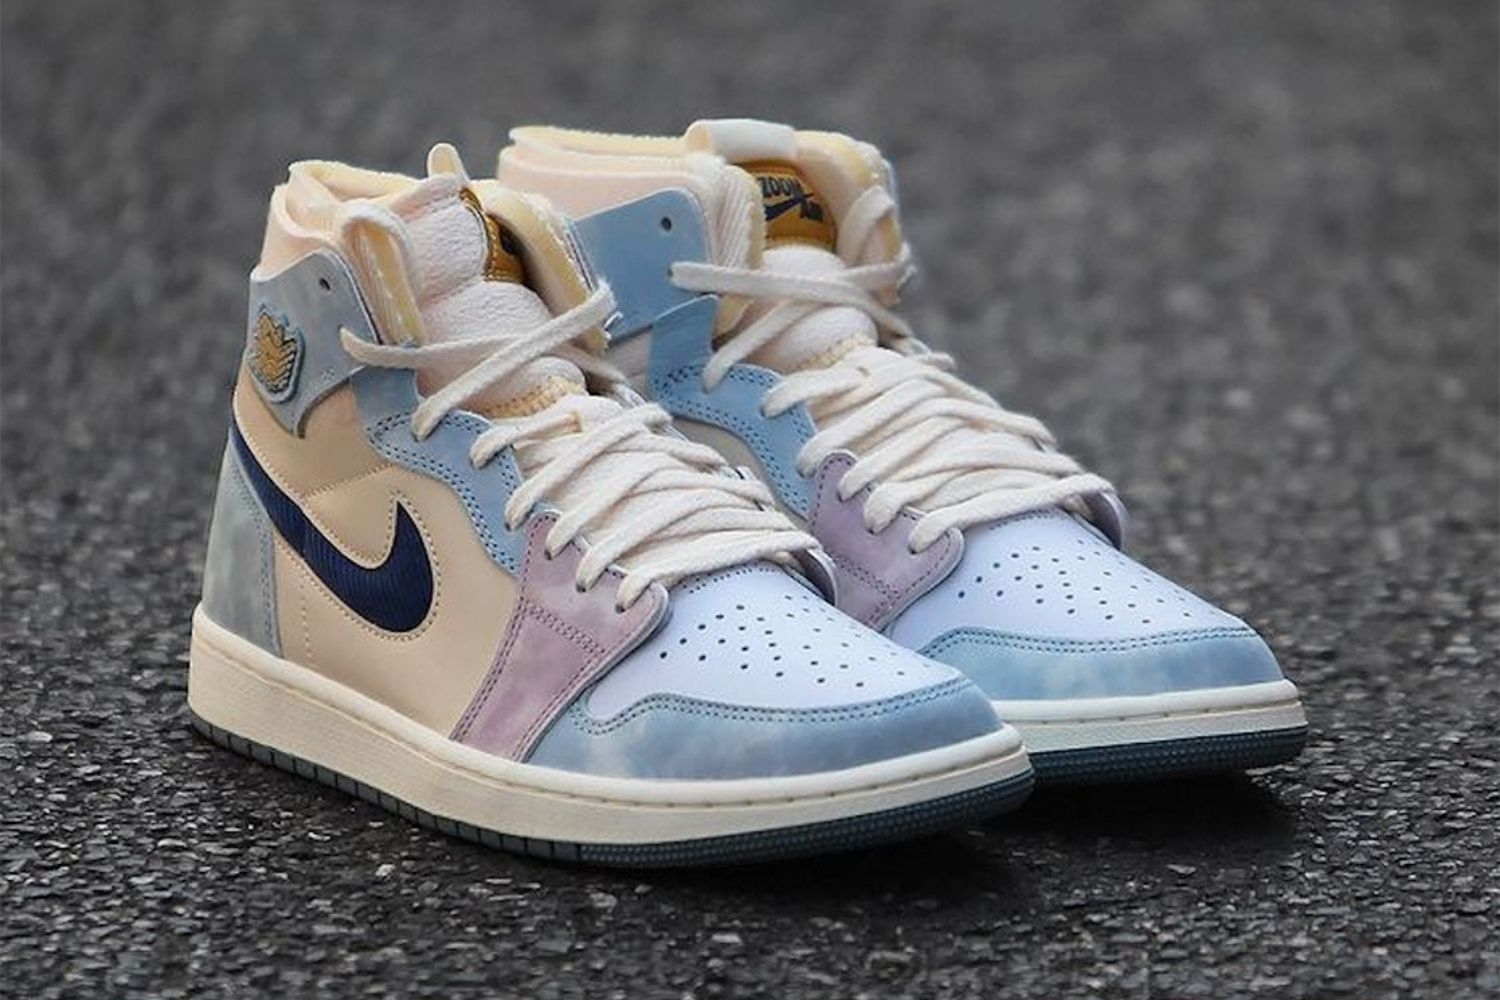 The Air Jordan 1 Zoom CMFT gets a 'Washed Blue' colorway